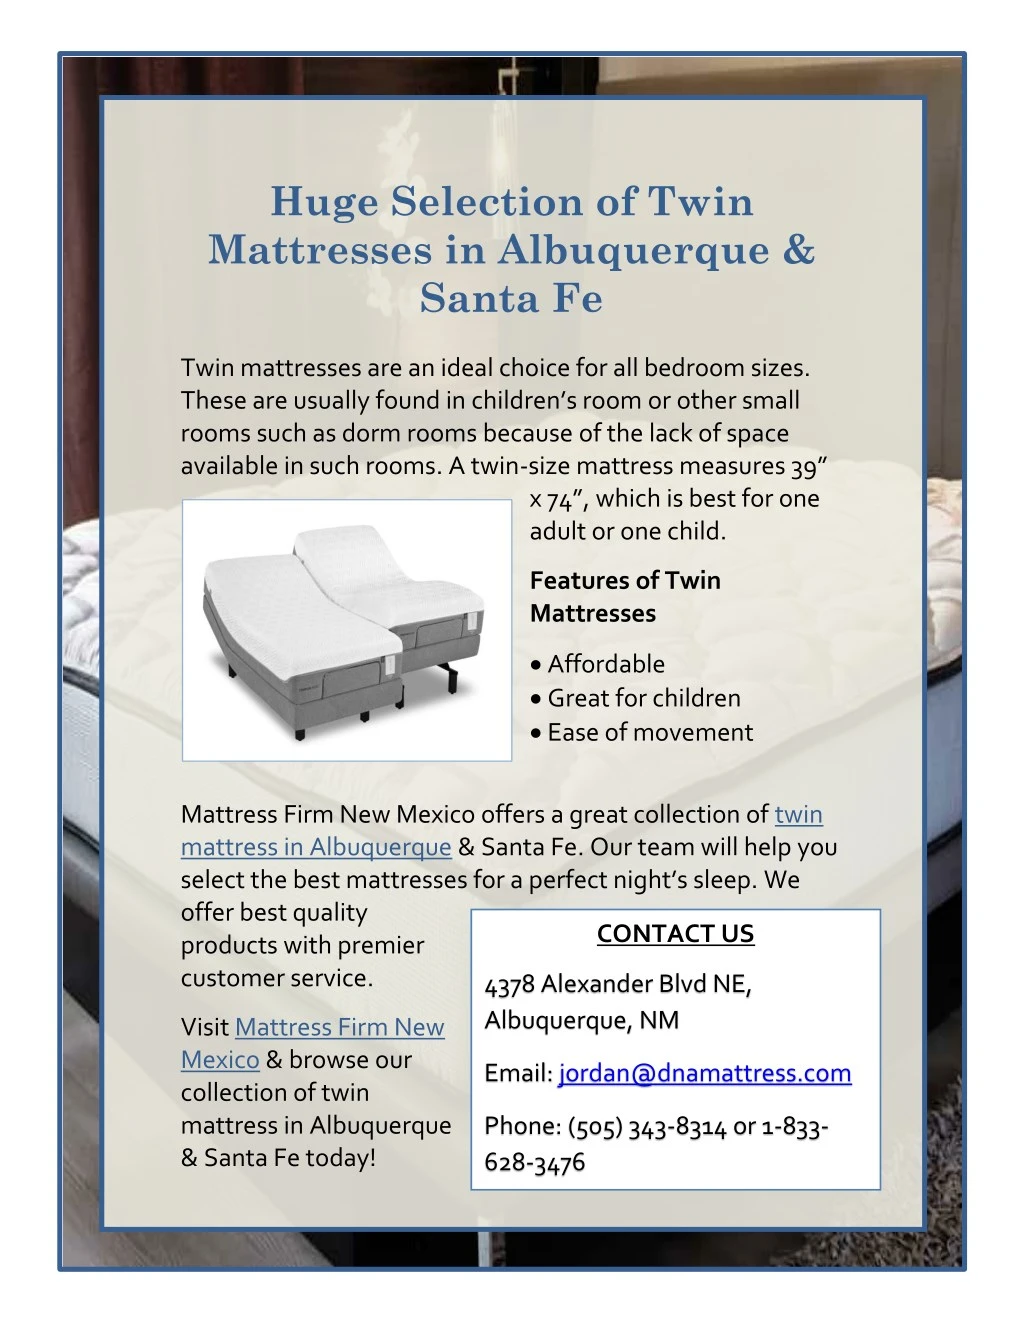 huge selection of twin mattresses in albuquerque